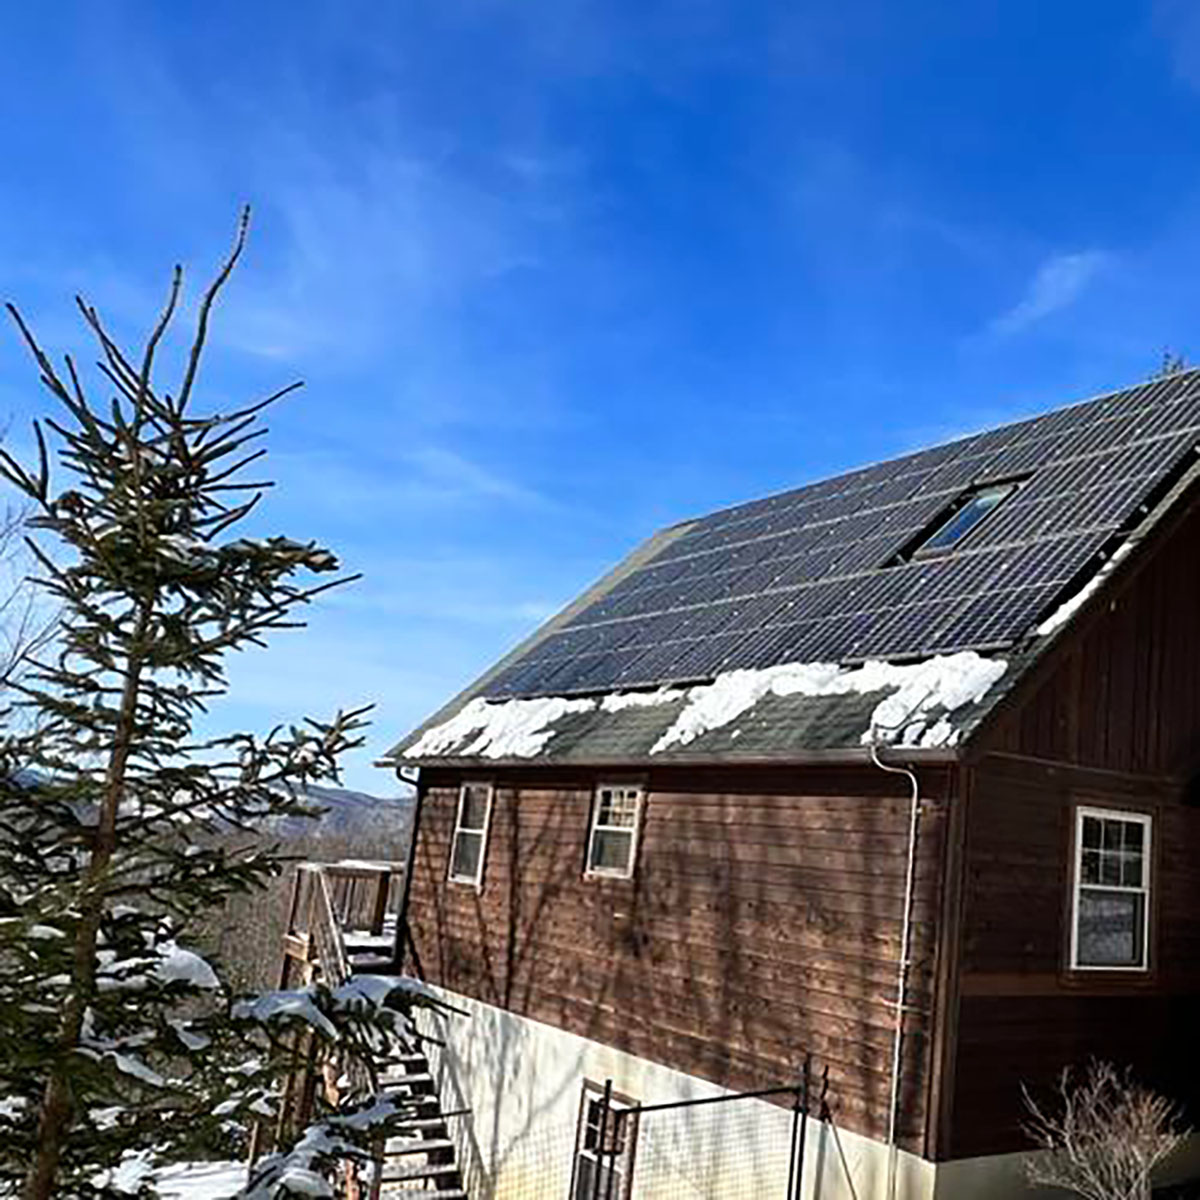 House with solar panel on rooftop with snow.